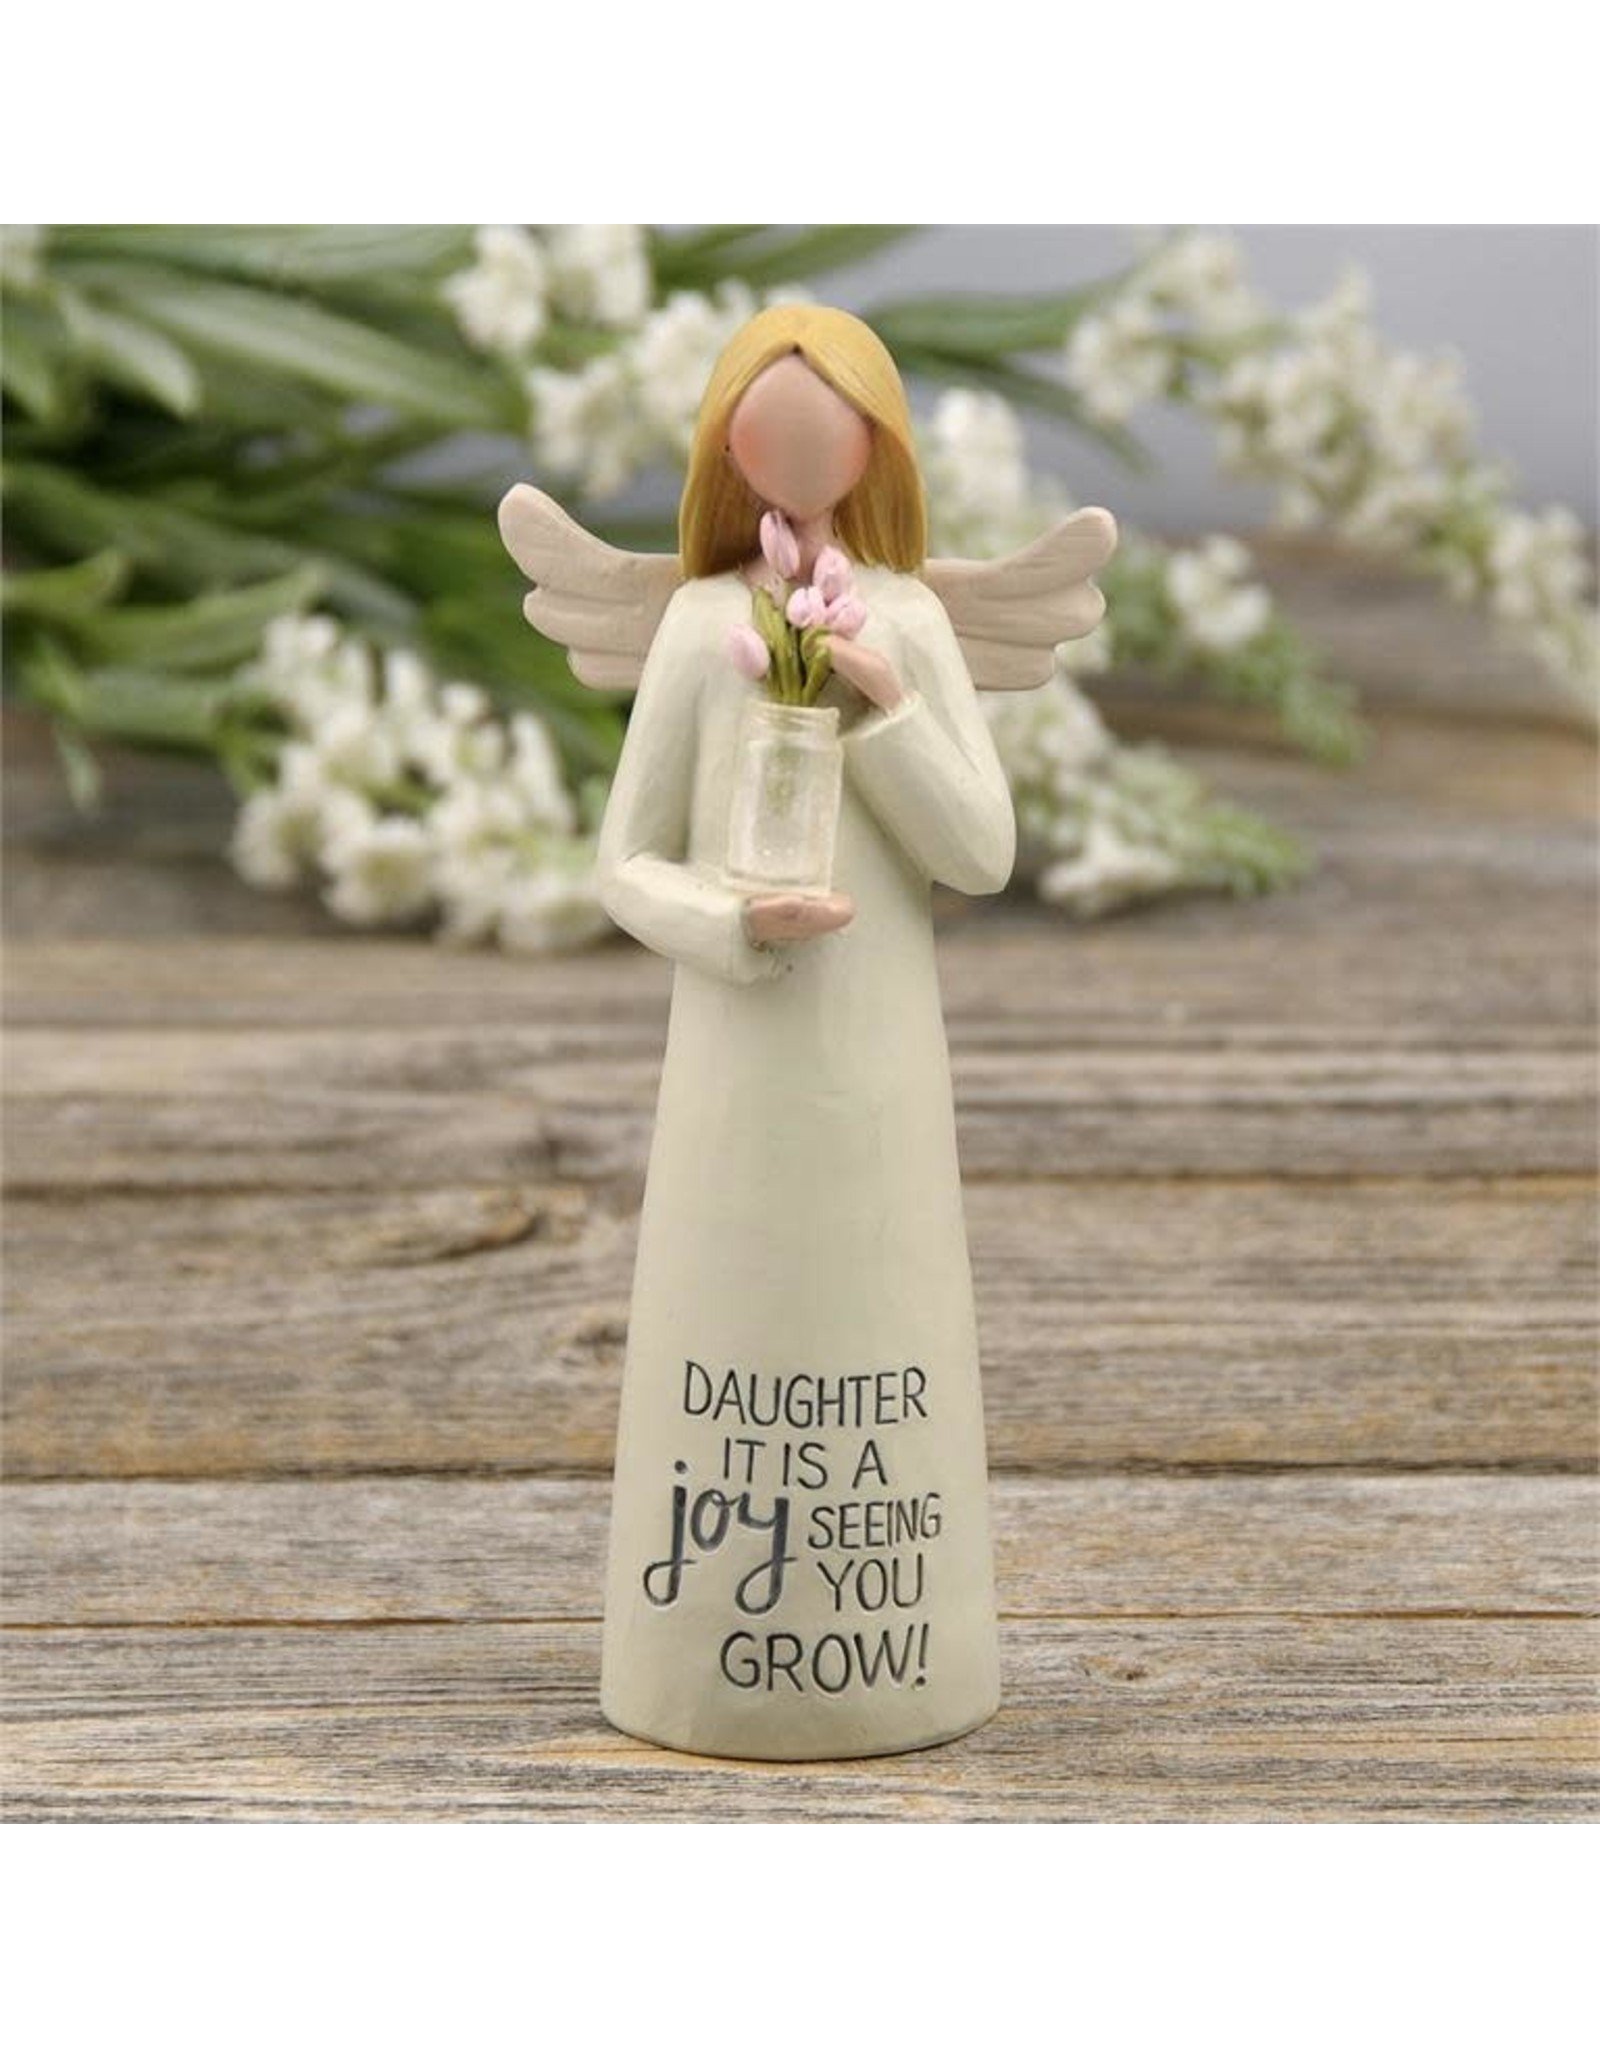 "Daughter" Angel Figurine with Flowers (5.25")